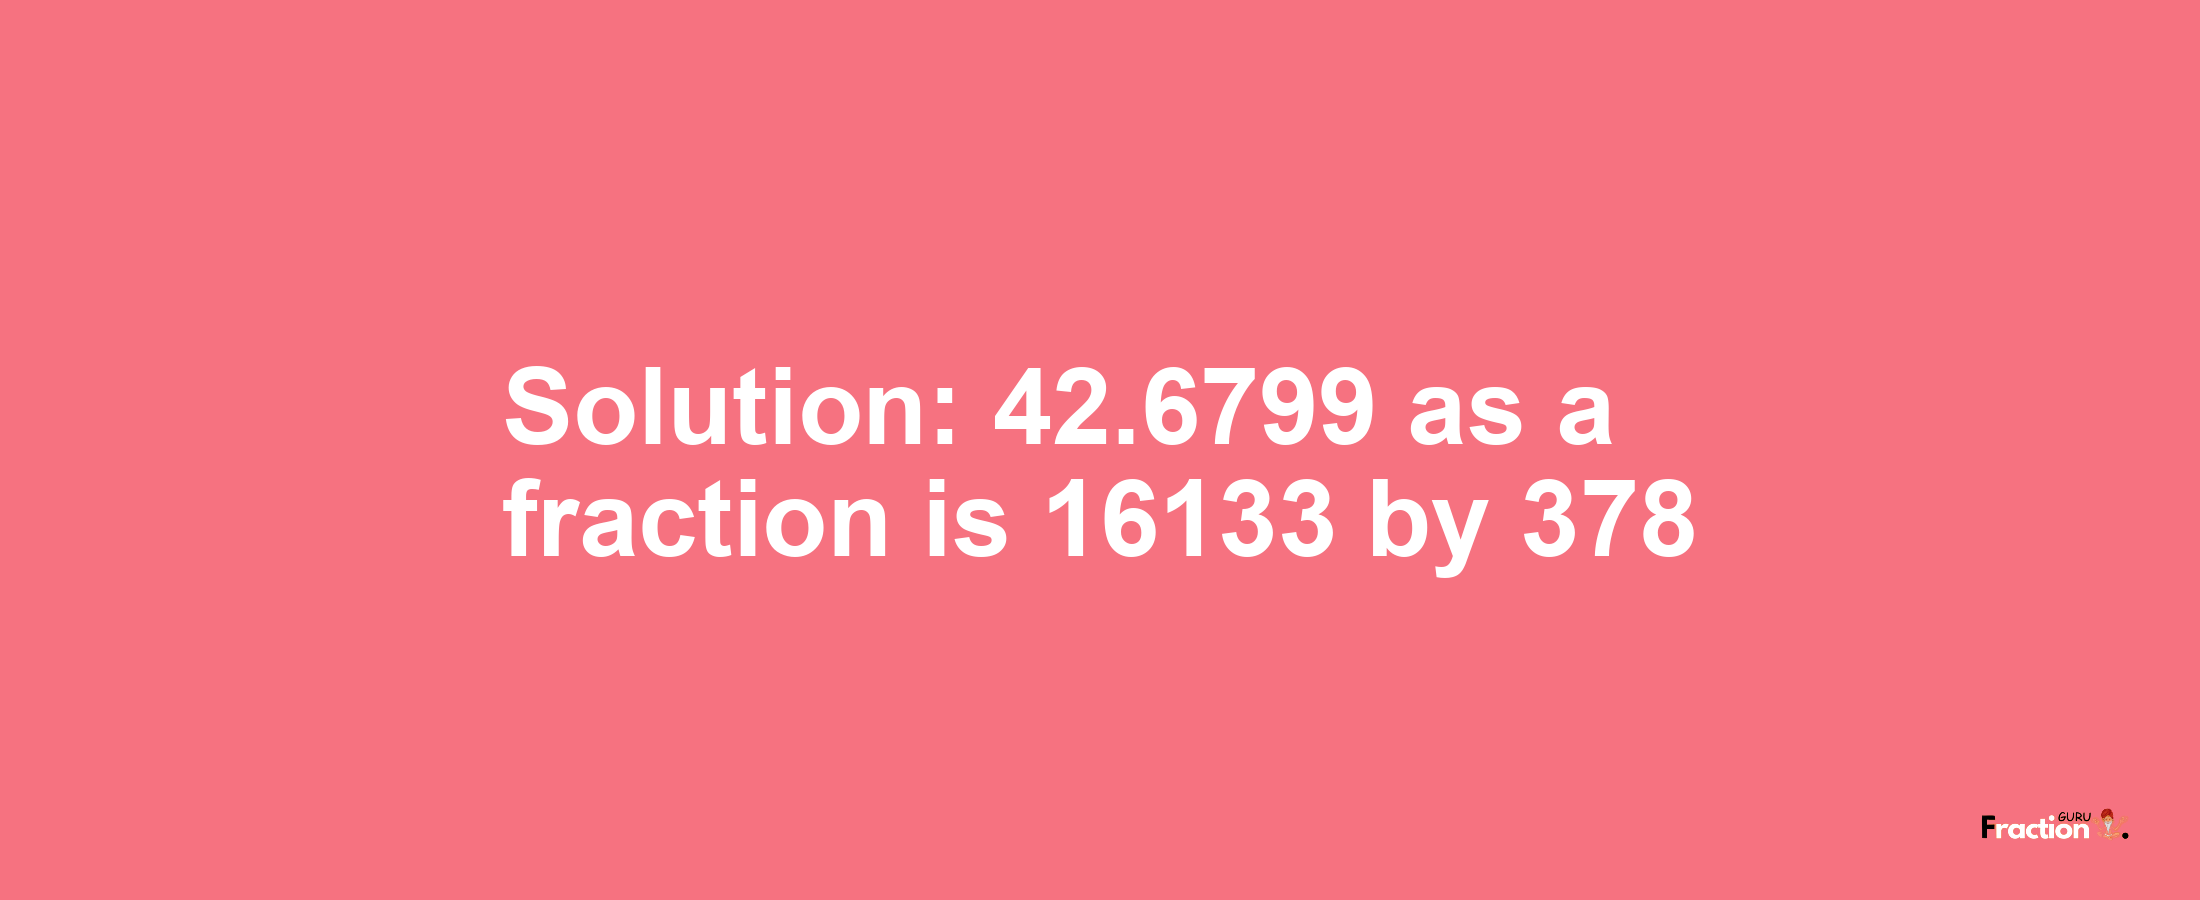 Solution:42.6799 as a fraction is 16133/378